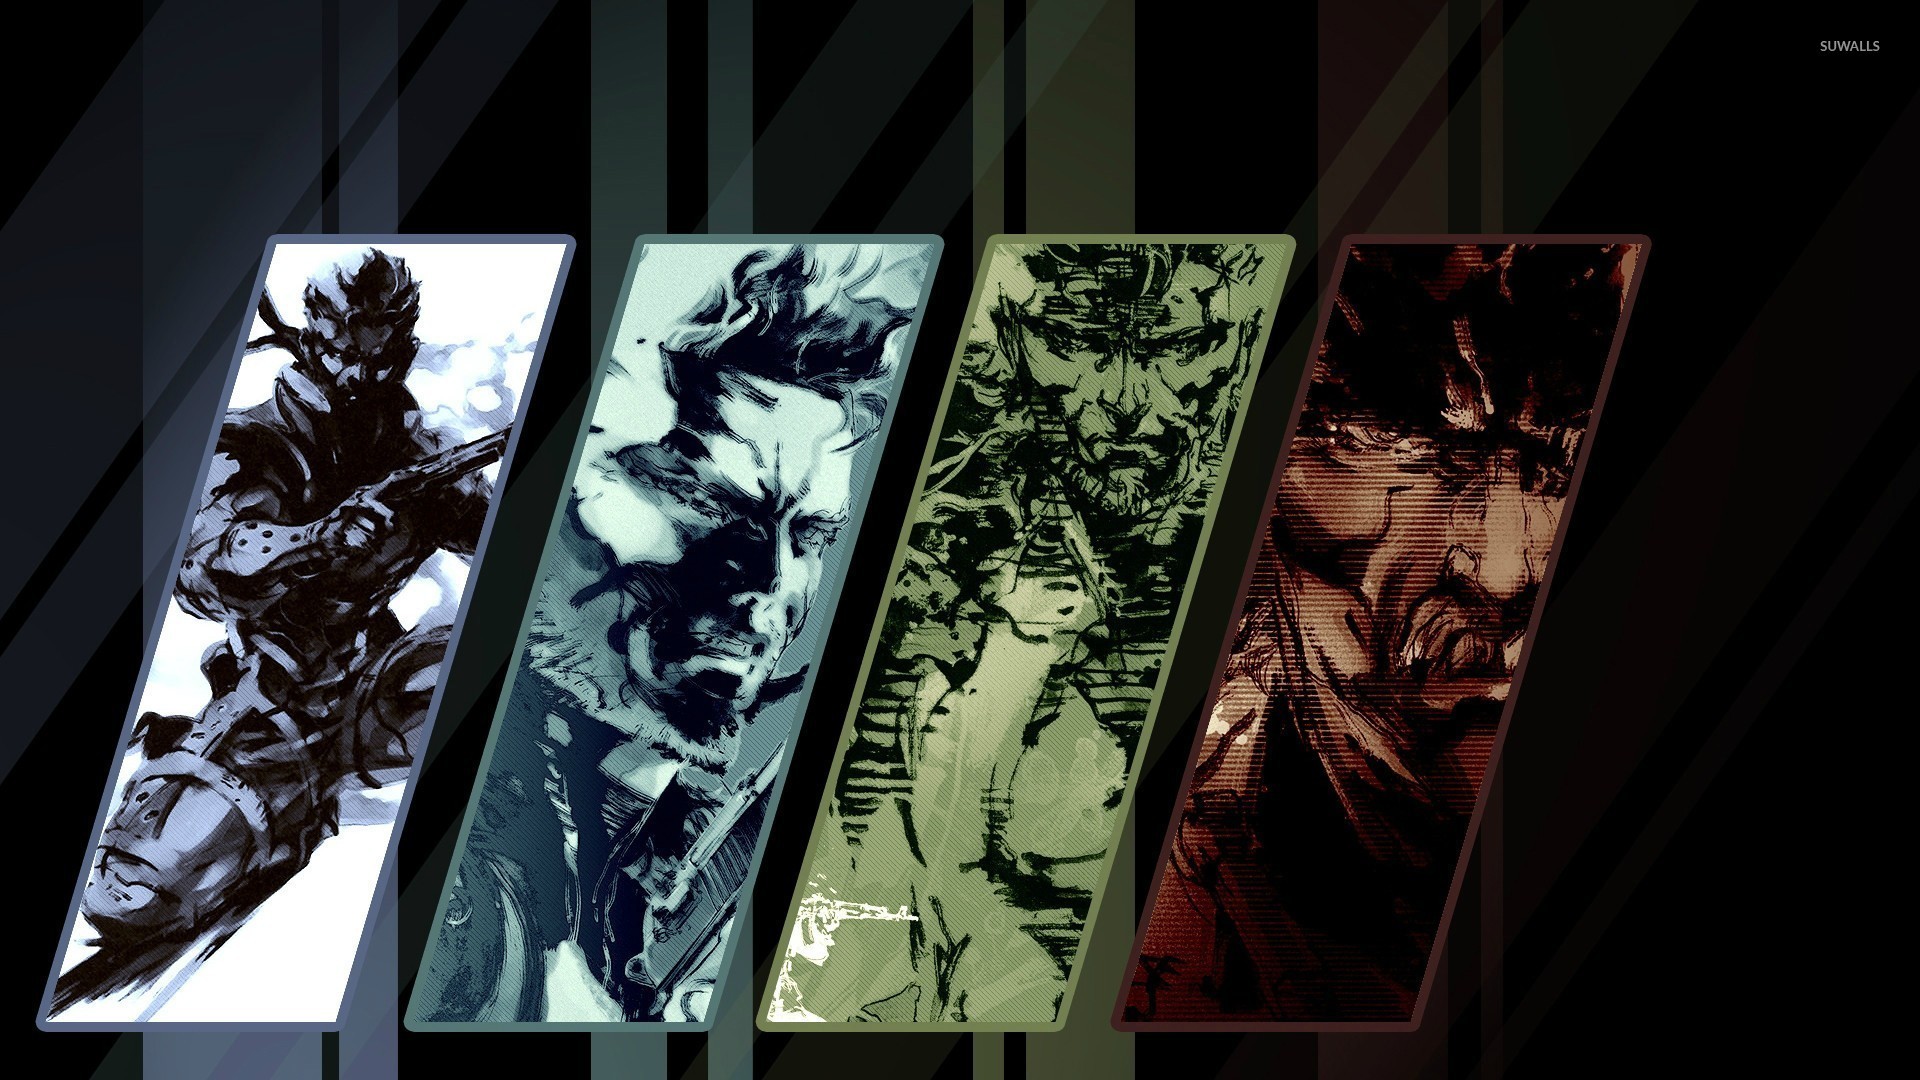 1920x1080 Metal Gear Solid Backgrounds Group 1920Ã1080